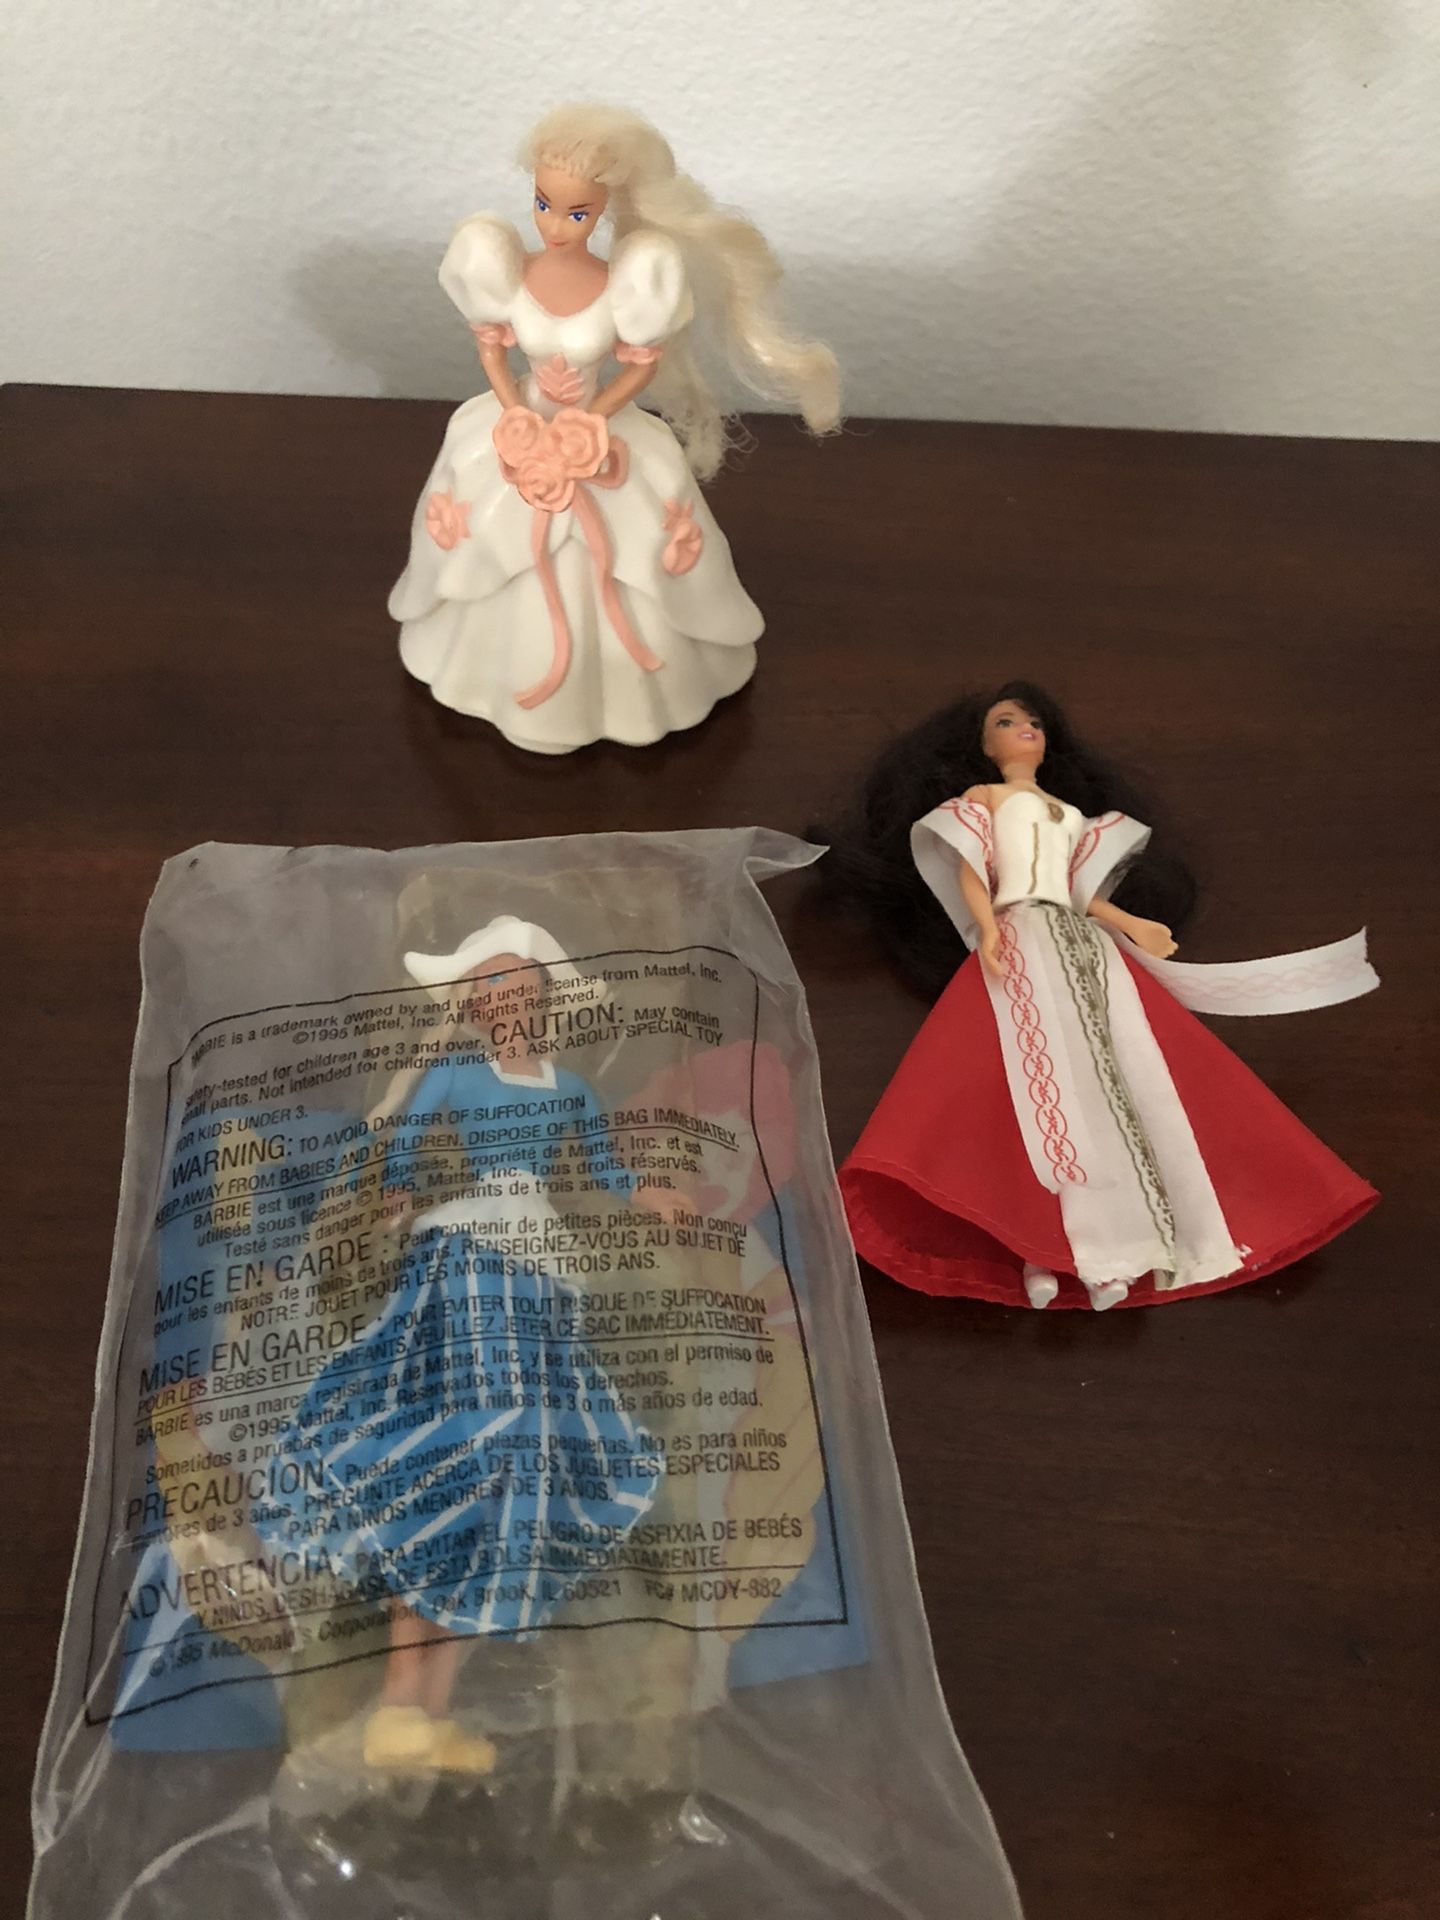 McDonalds Happy Meal Toys Toy Vintage Barbie 1992, 1995, 1996 Lot Of 3